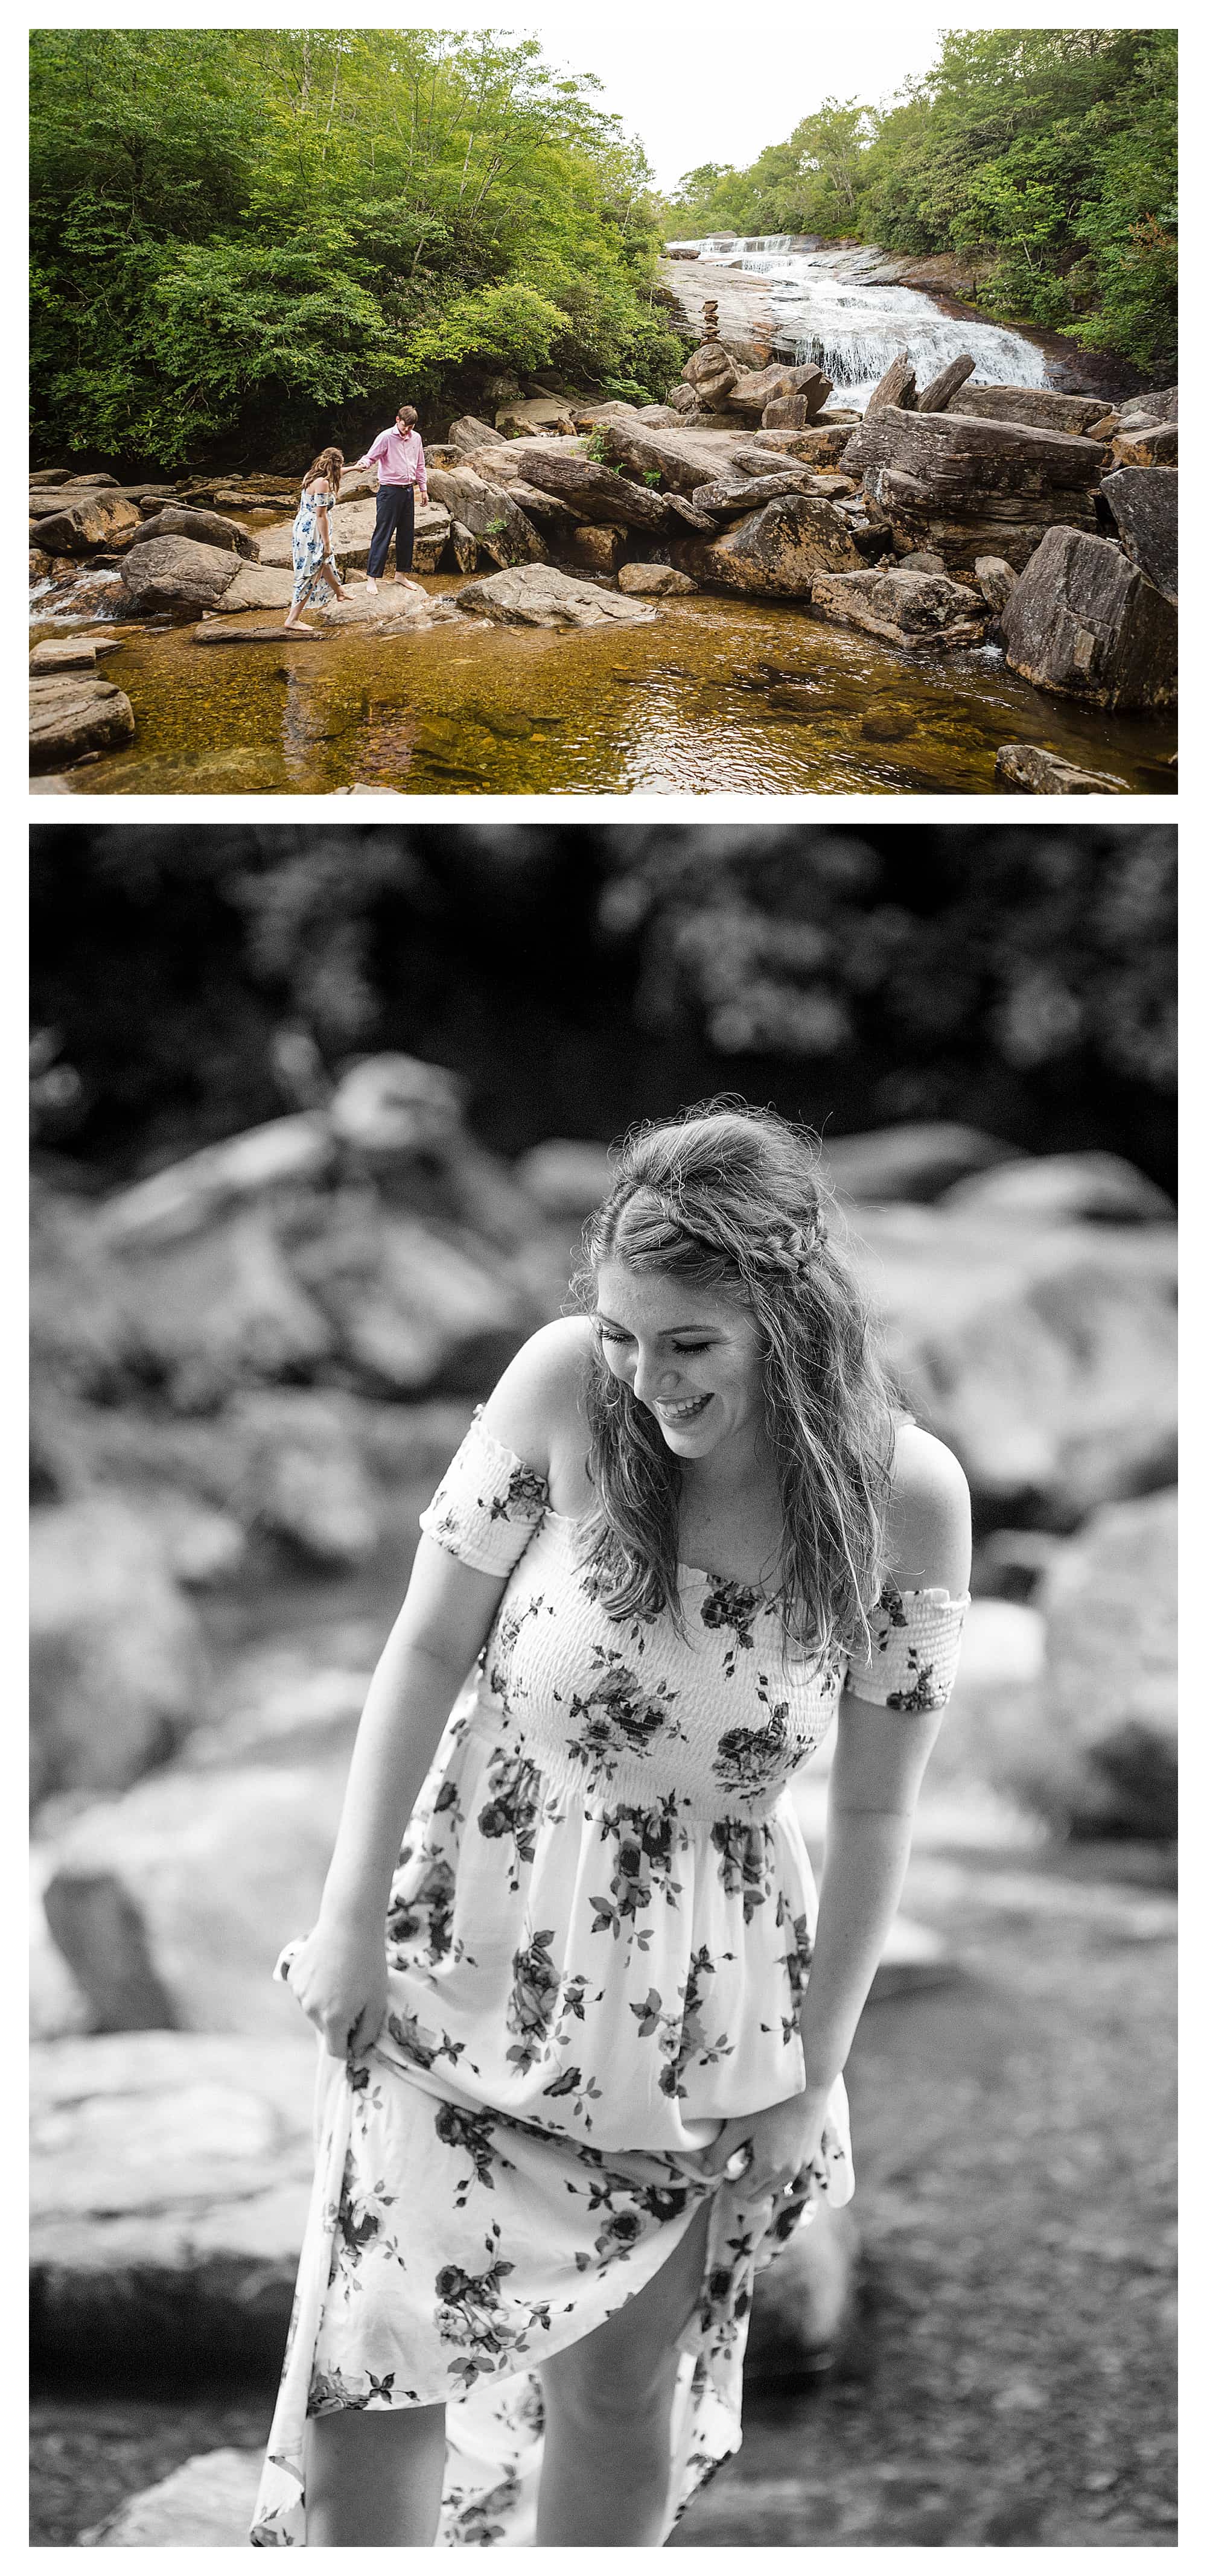 Photo of couple embracing on rocks beside calm river / second black and white photo of girl walk along rocks by river wearing white floral dress smiling